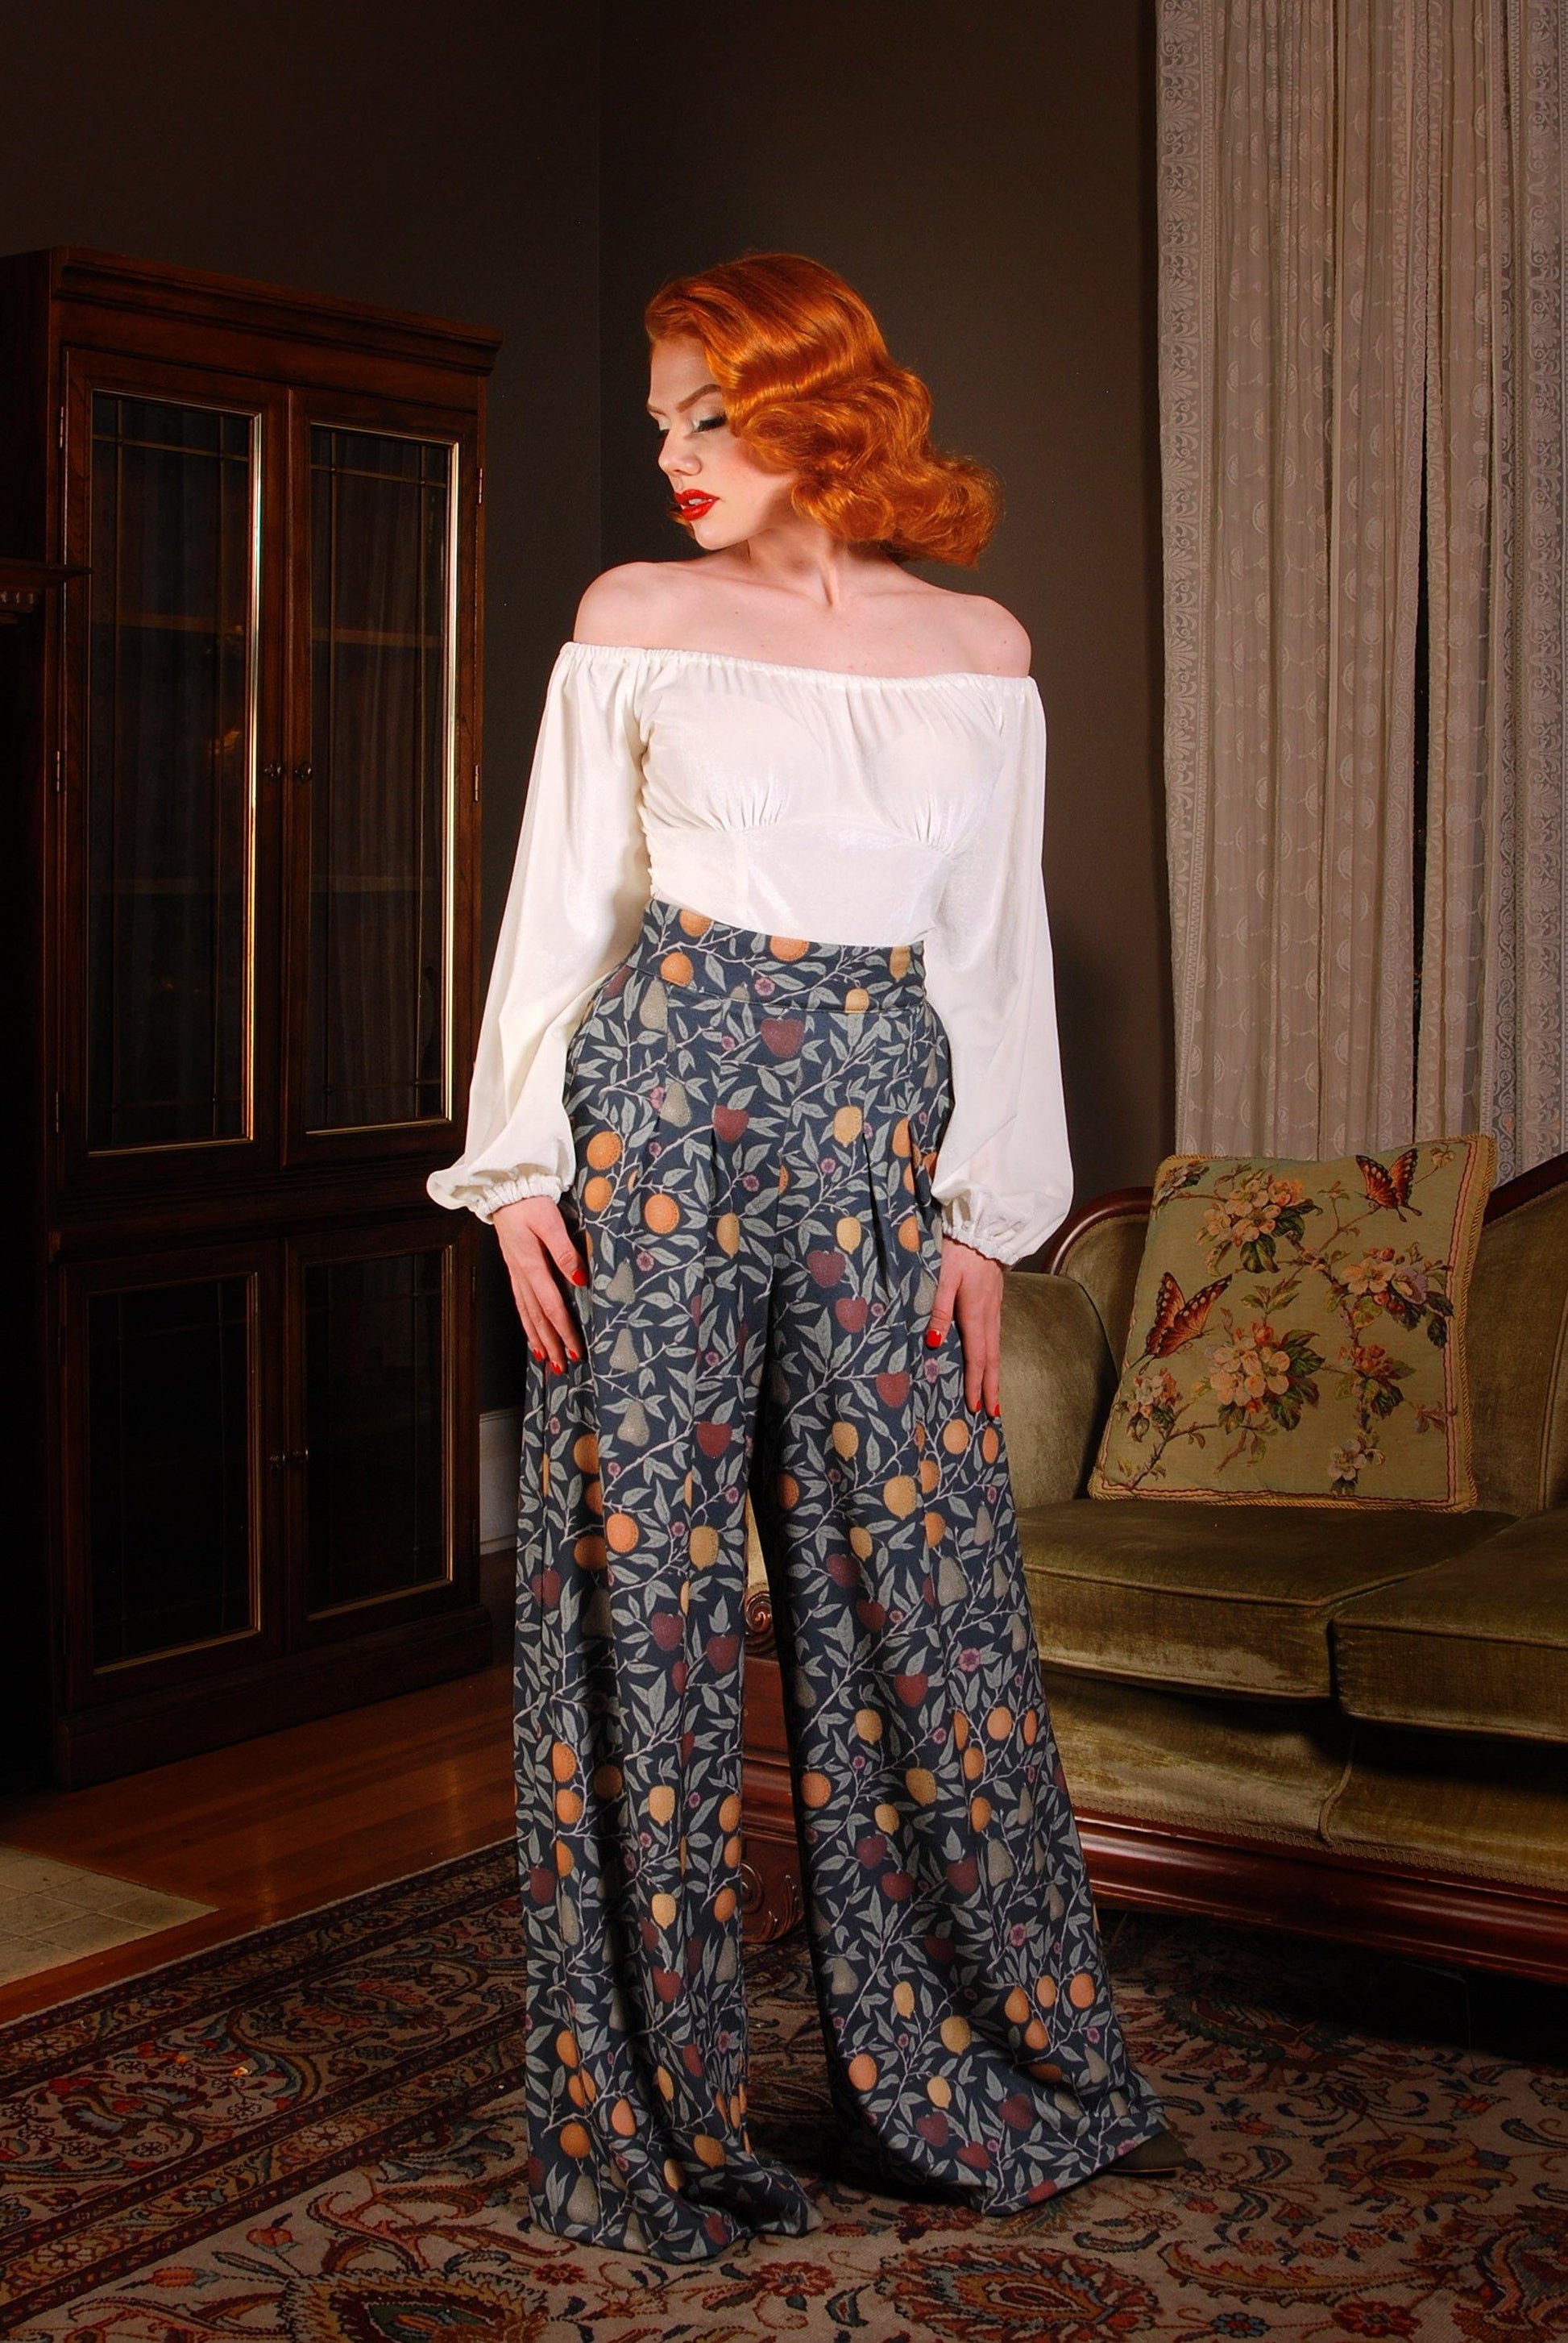 Pinup Girl Clothing models Cora Morgan and Seattle pose in the PUG favorite Dietrich vintage inspired wide leg palazzo pants with pockets made of high quality stretch crepe in the exclusive Laura Byrnes and Hope Morrison Night in Eden Fruit Print.